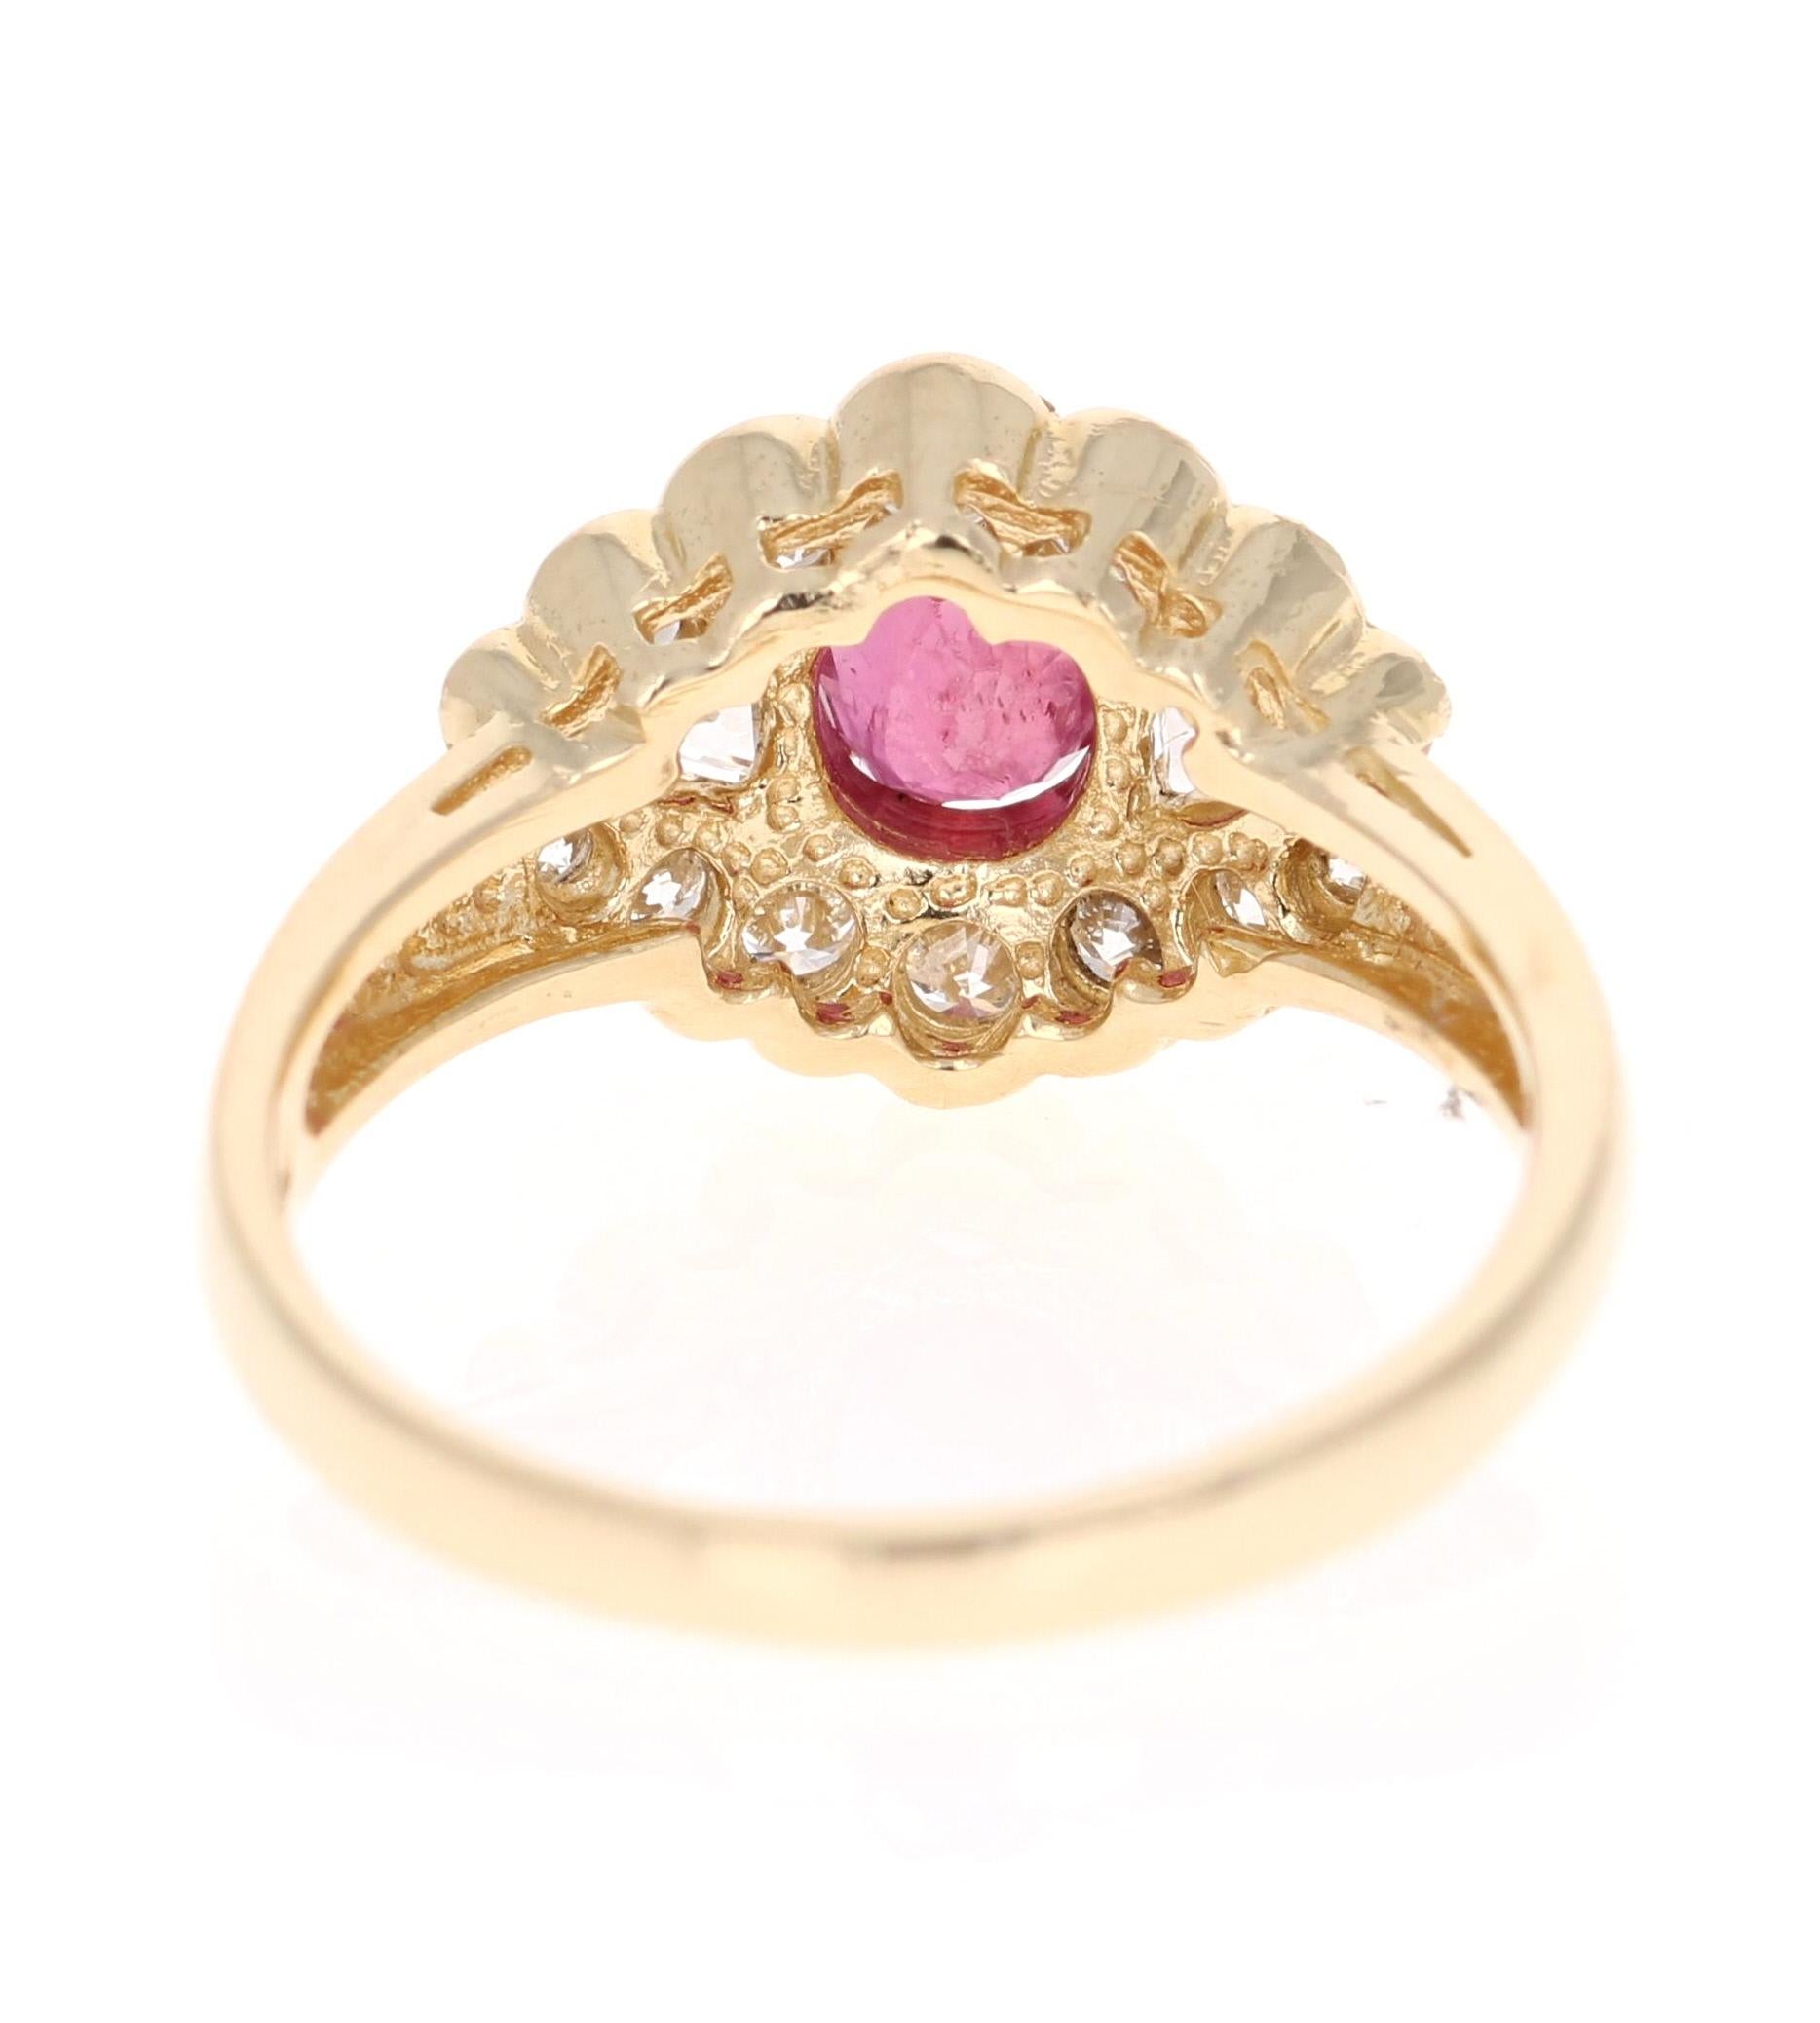 1.75 Carat Oval Cut Burmese Ruby Diamond 14 Karat Yellow Gold Cluster Ring In New Condition For Sale In Los Angeles, CA